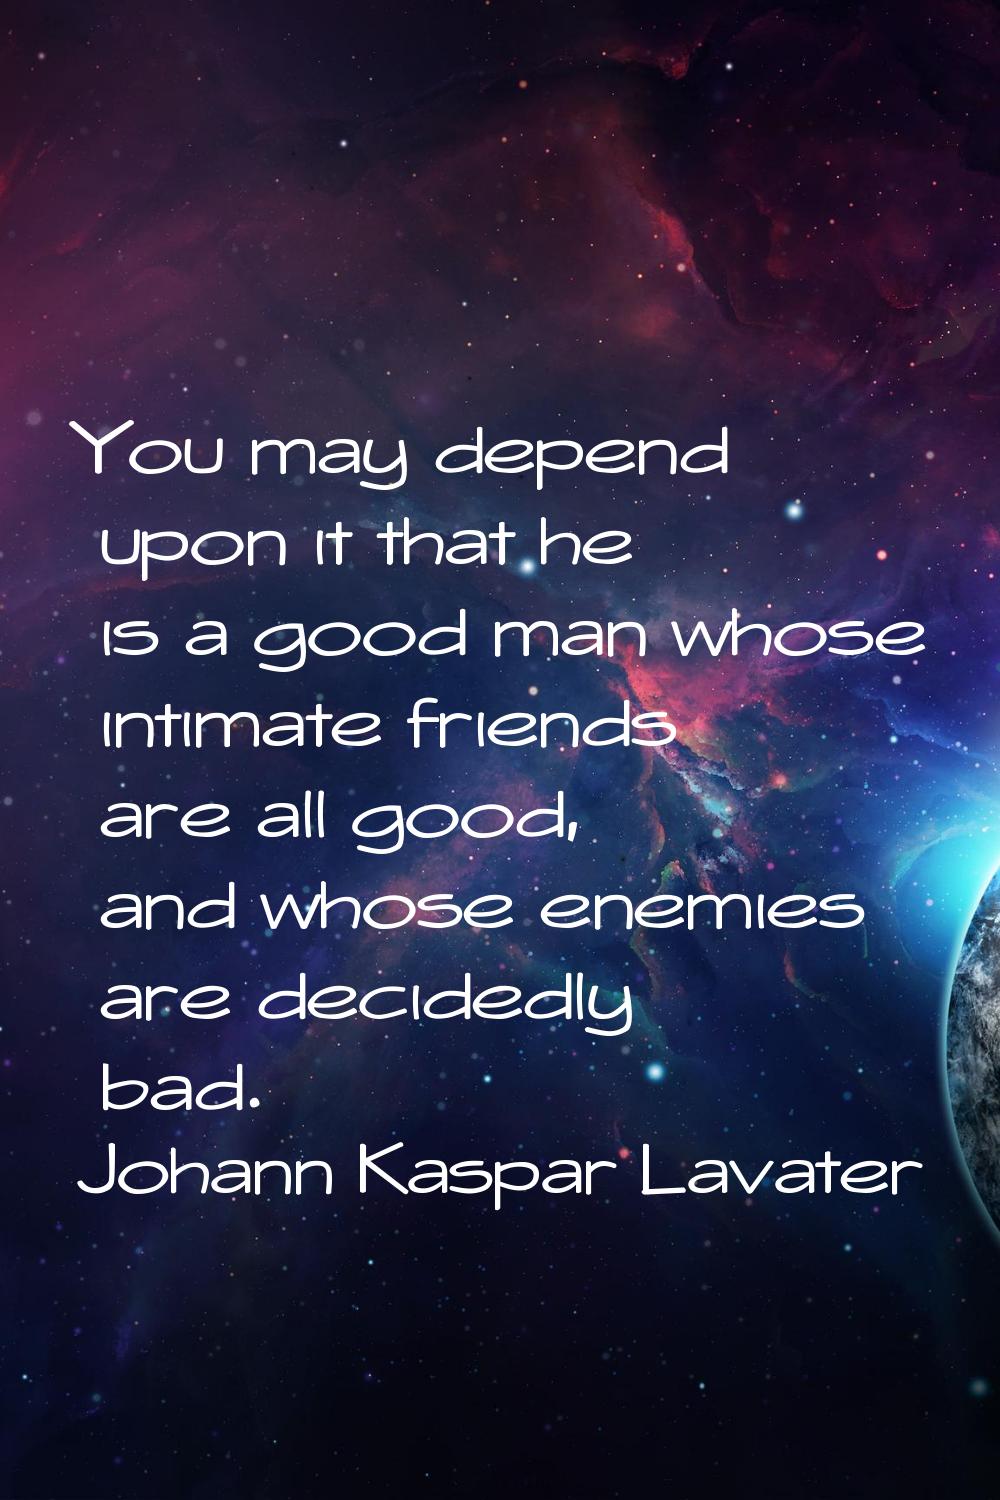 You may depend upon it that he is a good man whose intimate friends are all good, and whose enemies